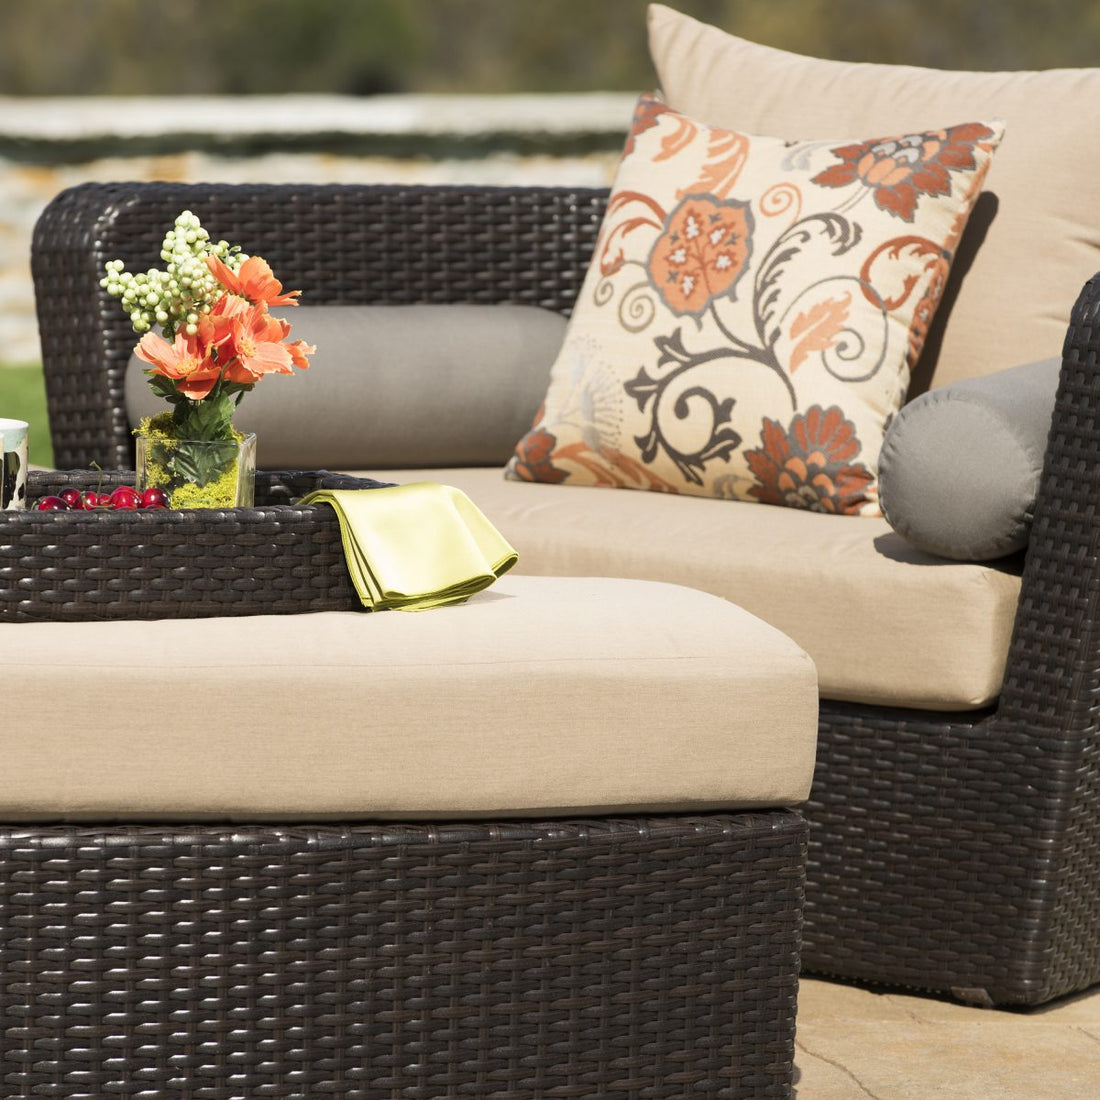 When is it Time to Replace Your Outdoor Patio Furniture